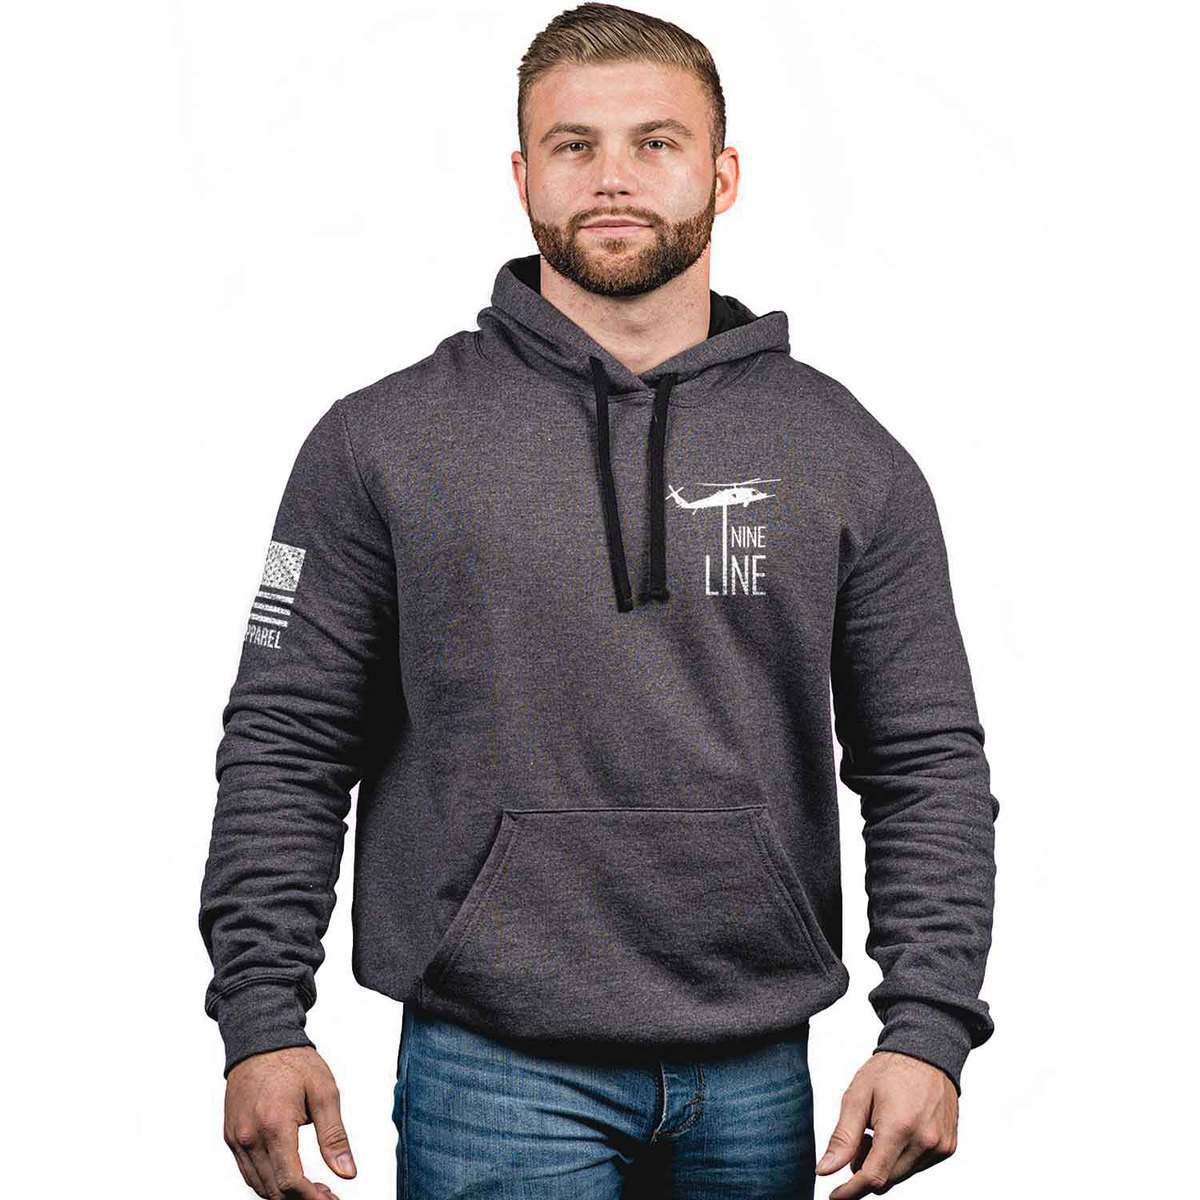 Nine Line Men's Don't Tread On Me Casual Hoodie - Charcoal - L ...